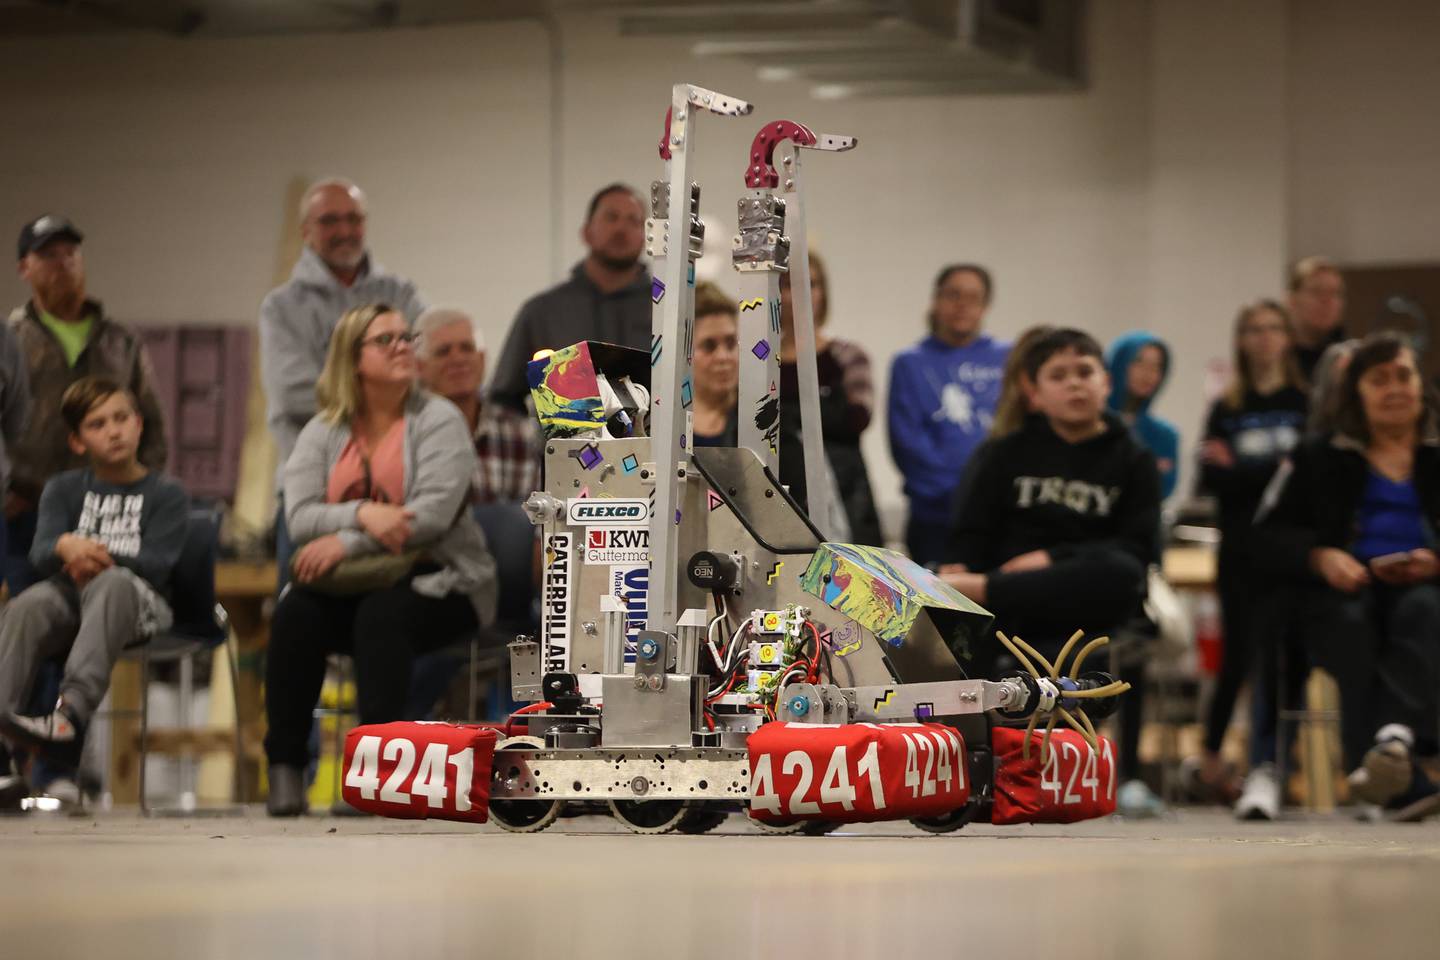 Steel Tigers Robotics Team 4241, consisting of students from Joliet Central and Joliet West, unveil their robot for the upcoming FIRST Robotics Midwest Regional Competition. Wednesday, April 6, 2022, in Joliet.